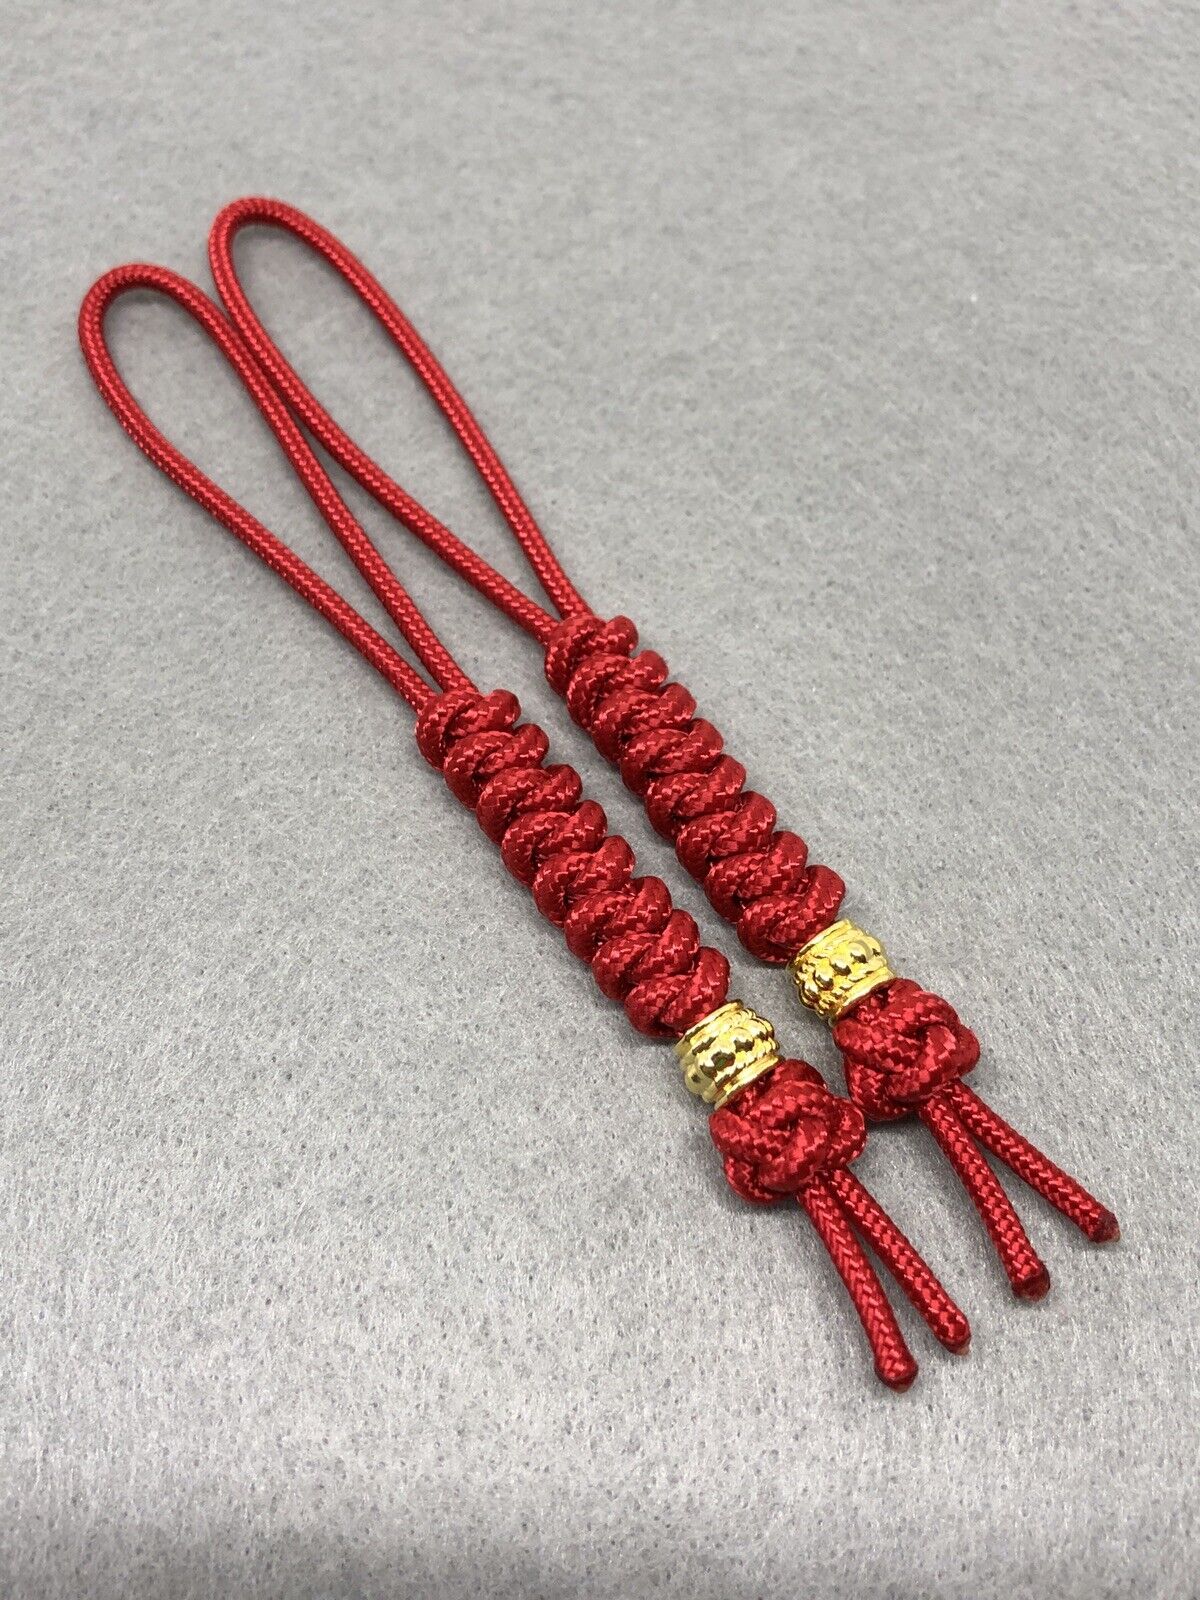 275 Paracord  Knife Lanyard 2pk Red Cord Snake Knot With Metal Bead